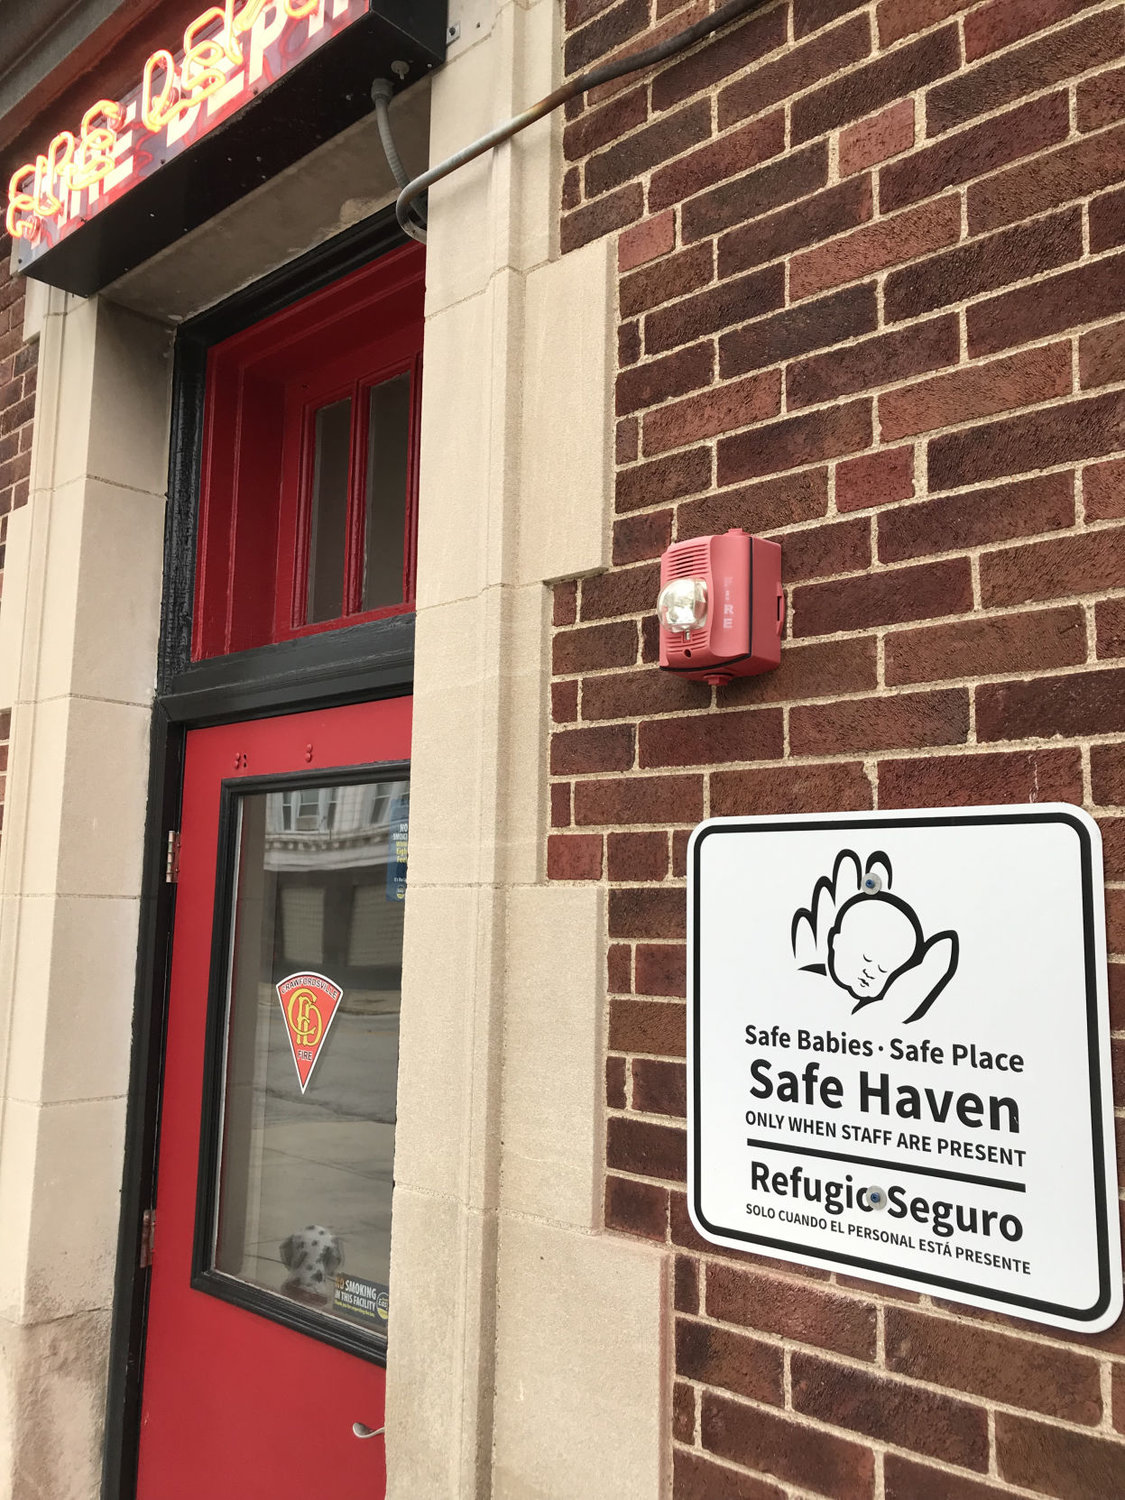 A sign designates Crawfordsville Fire Station No. 1 as a "safe haven" for relinquishing unwanted and unharmed babies. The safe haven law covers any staffed firehouse, police station or hospital.